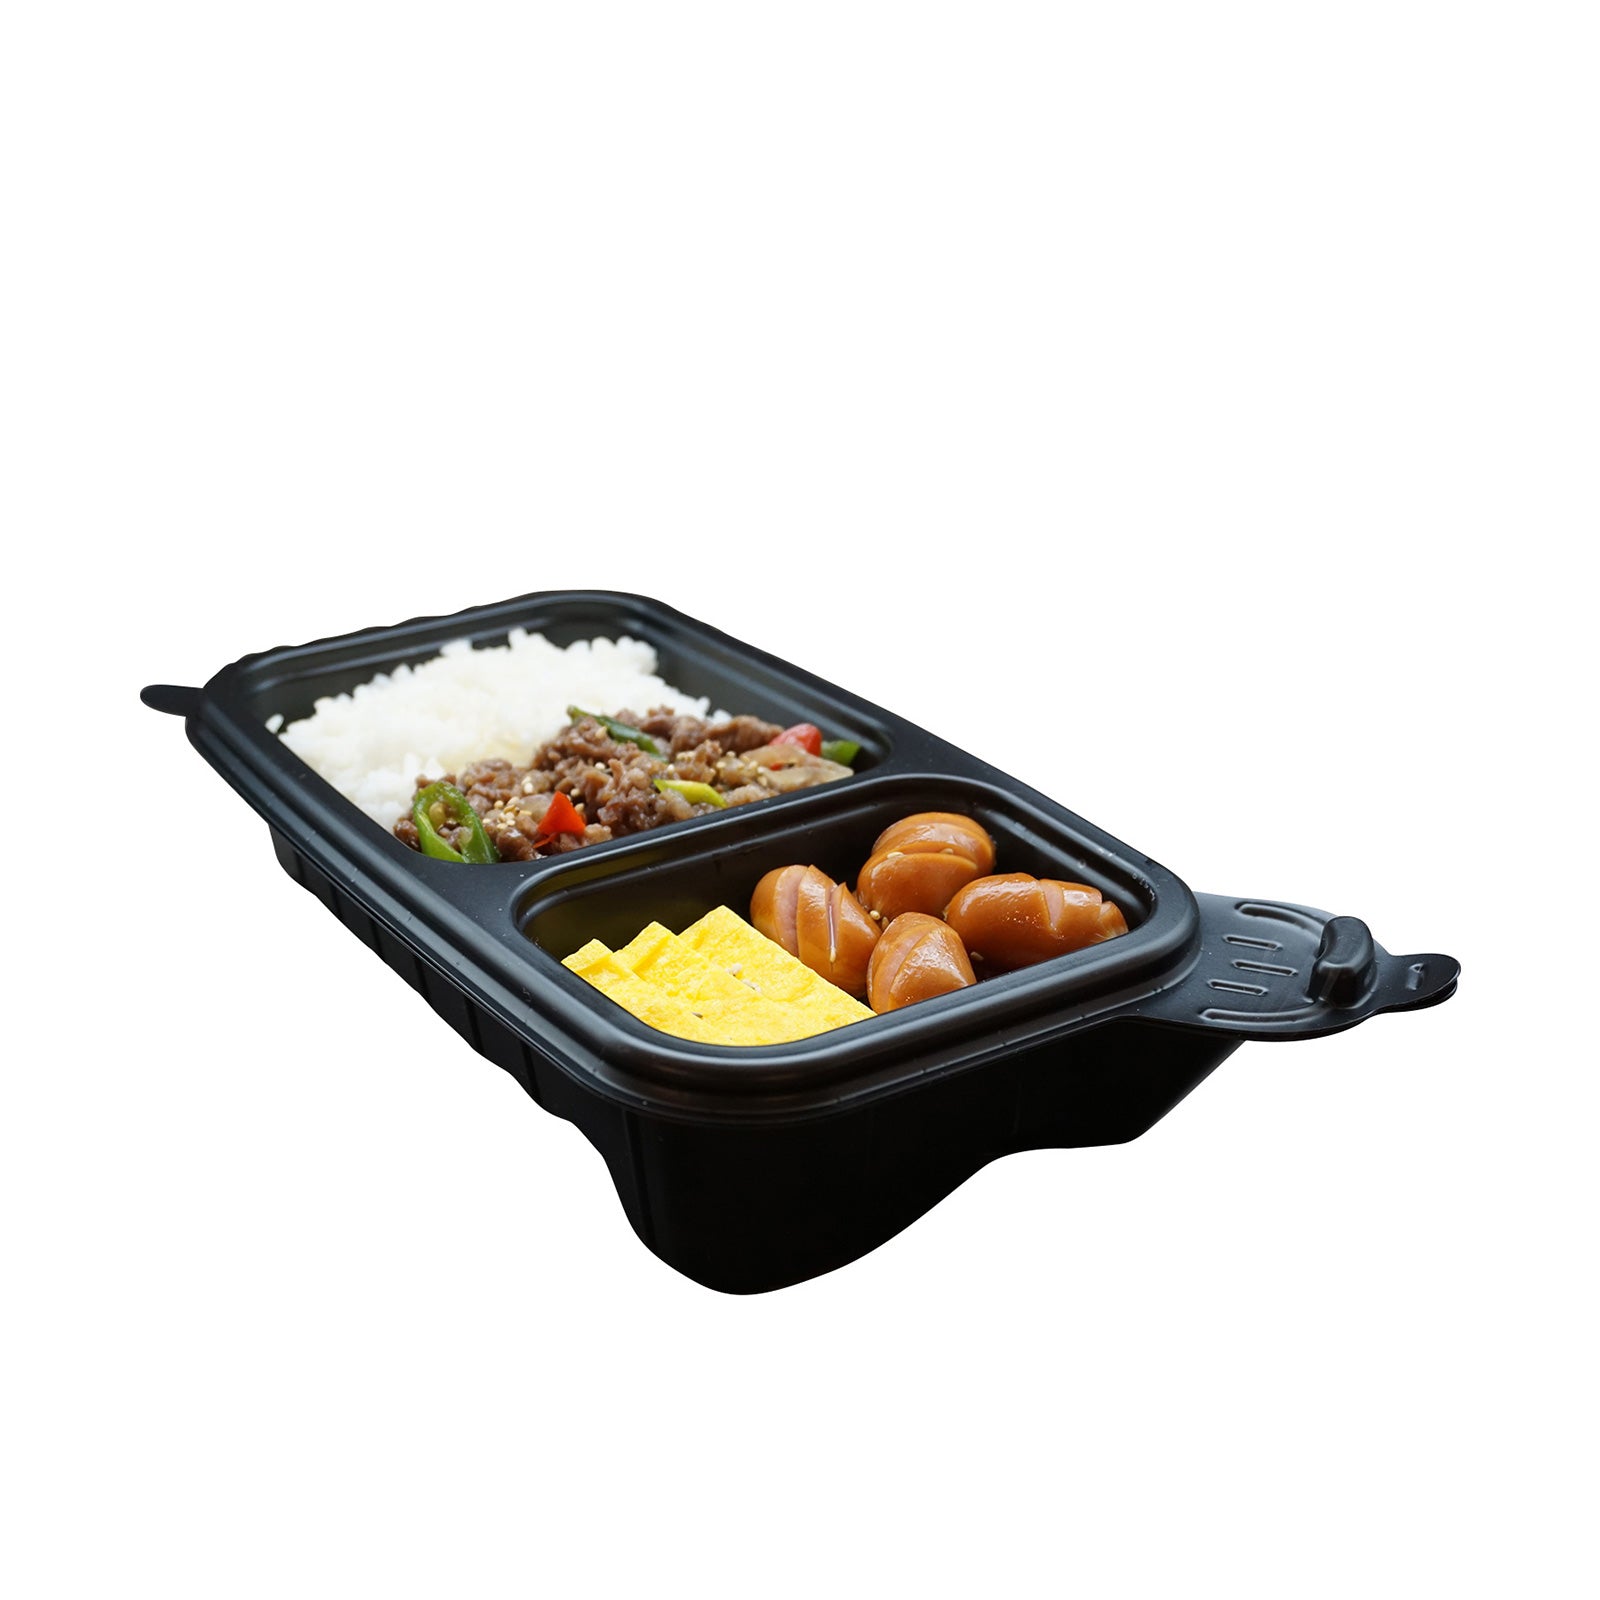 Sirak Food 100-Pack Dalat Heating Lunch Box Container 26cm B | Convenient Lunch Storage